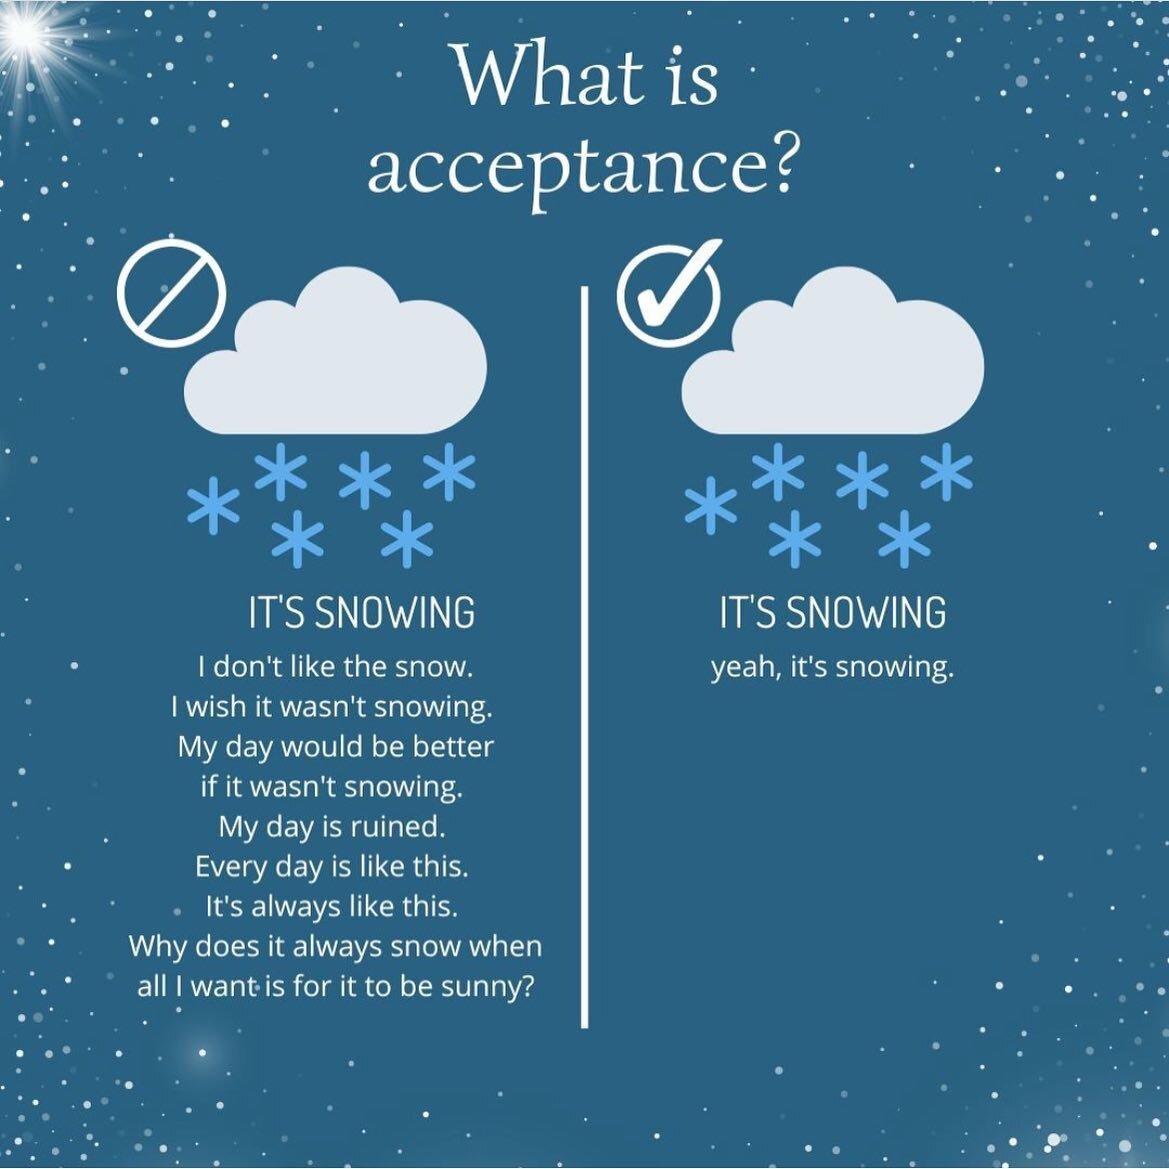 Acceptance is a practice of acknowledging things as they are, instead of ignoring, avoiding, or wishing the situation were different. Acceptance does not mean liking, wanting, or choosing a situation or thought. 

Through acceptance, we release resis